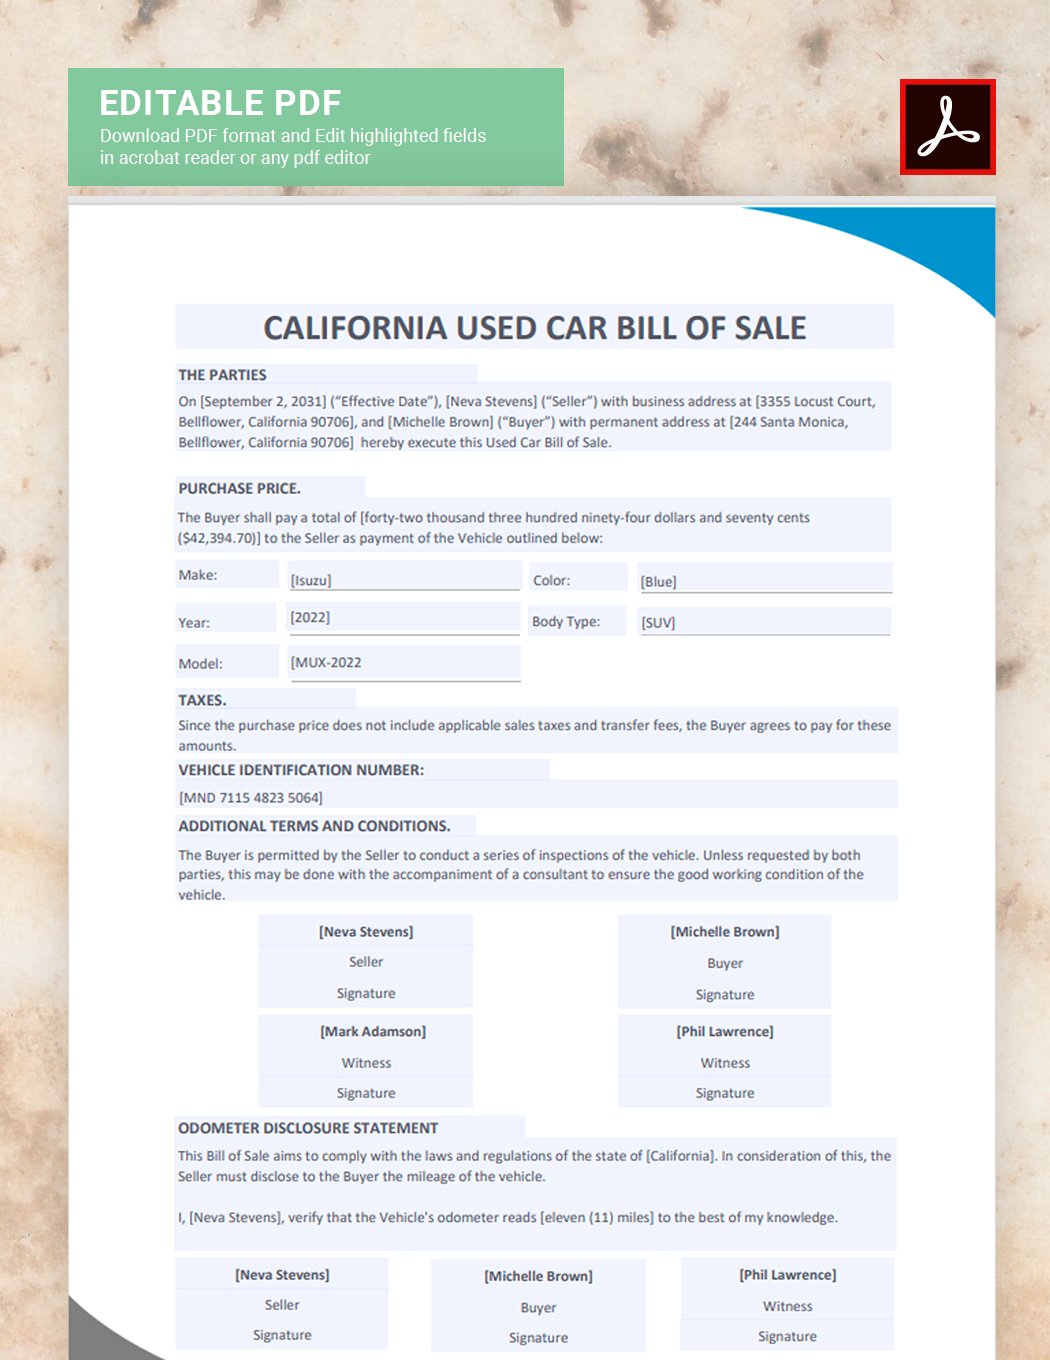 California Used Car Bill Of Sale Template Download in Word, Google